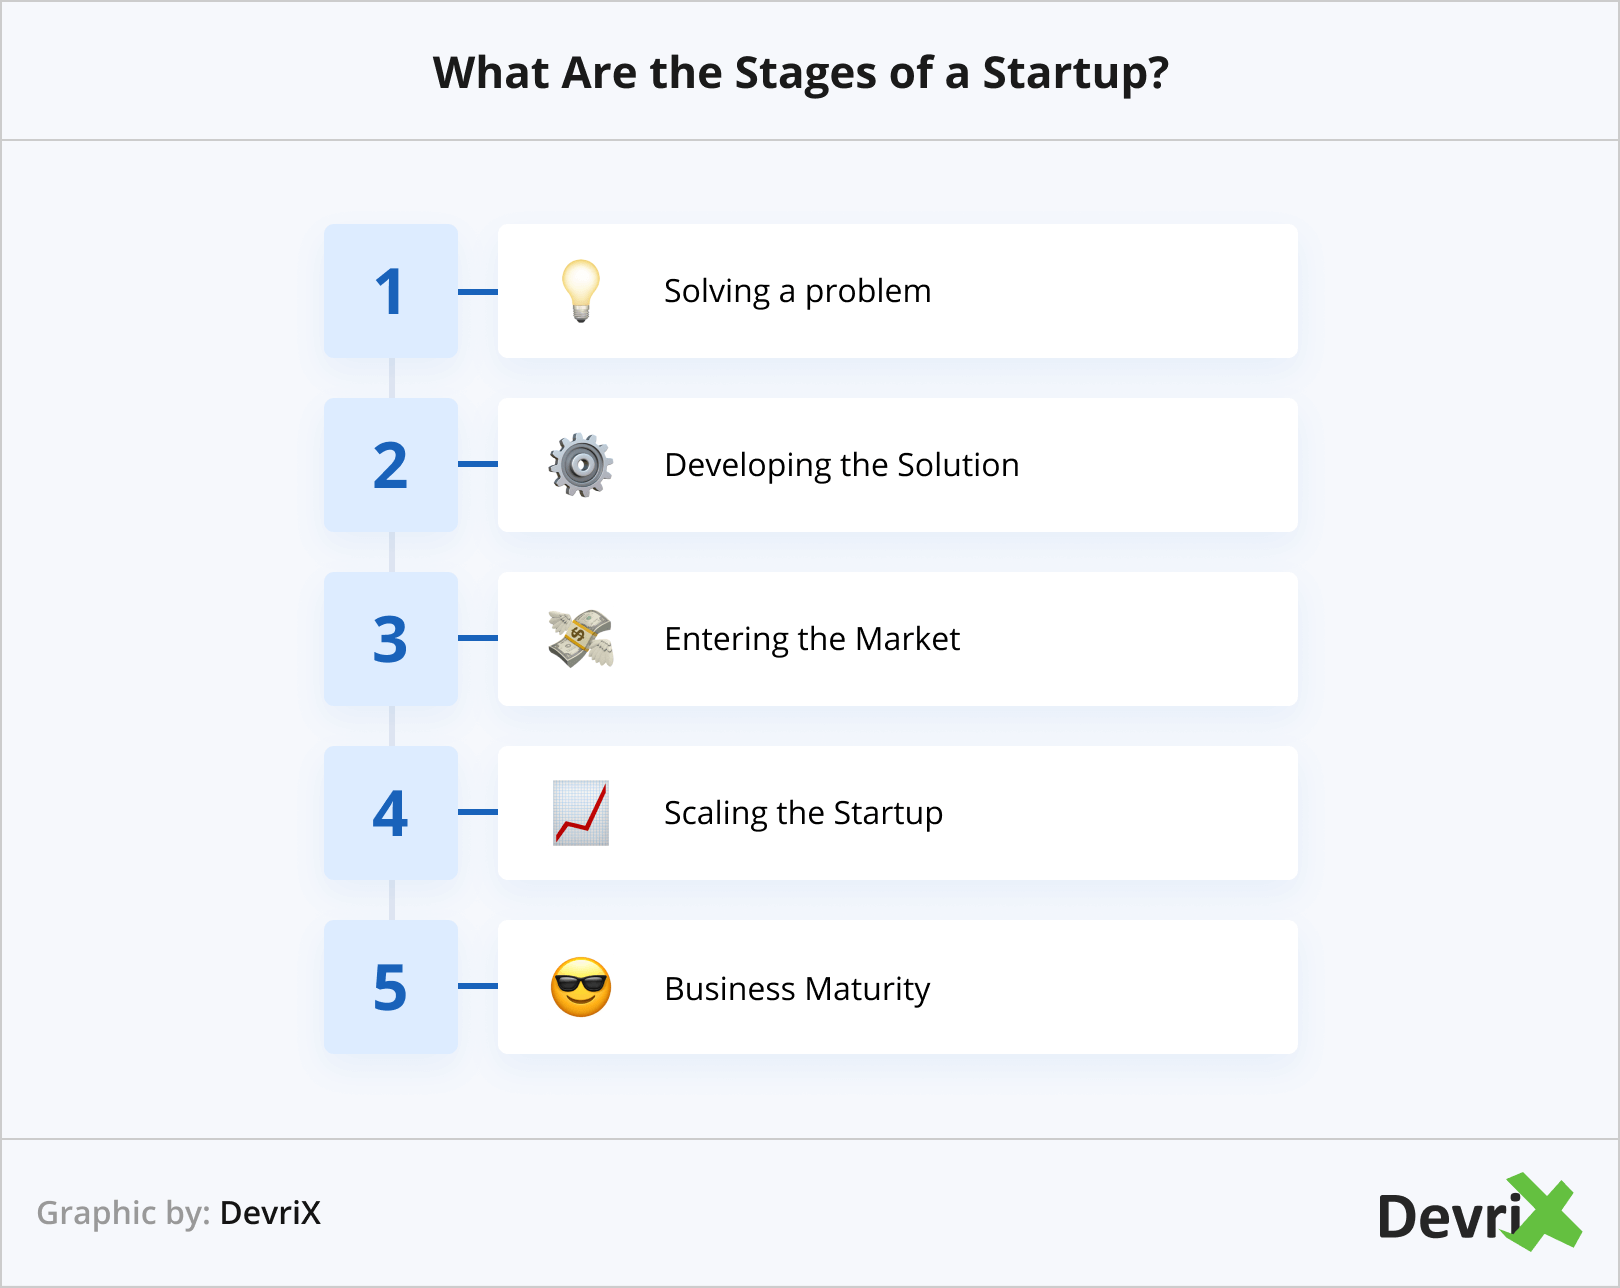 What Are the Stages of a Startup